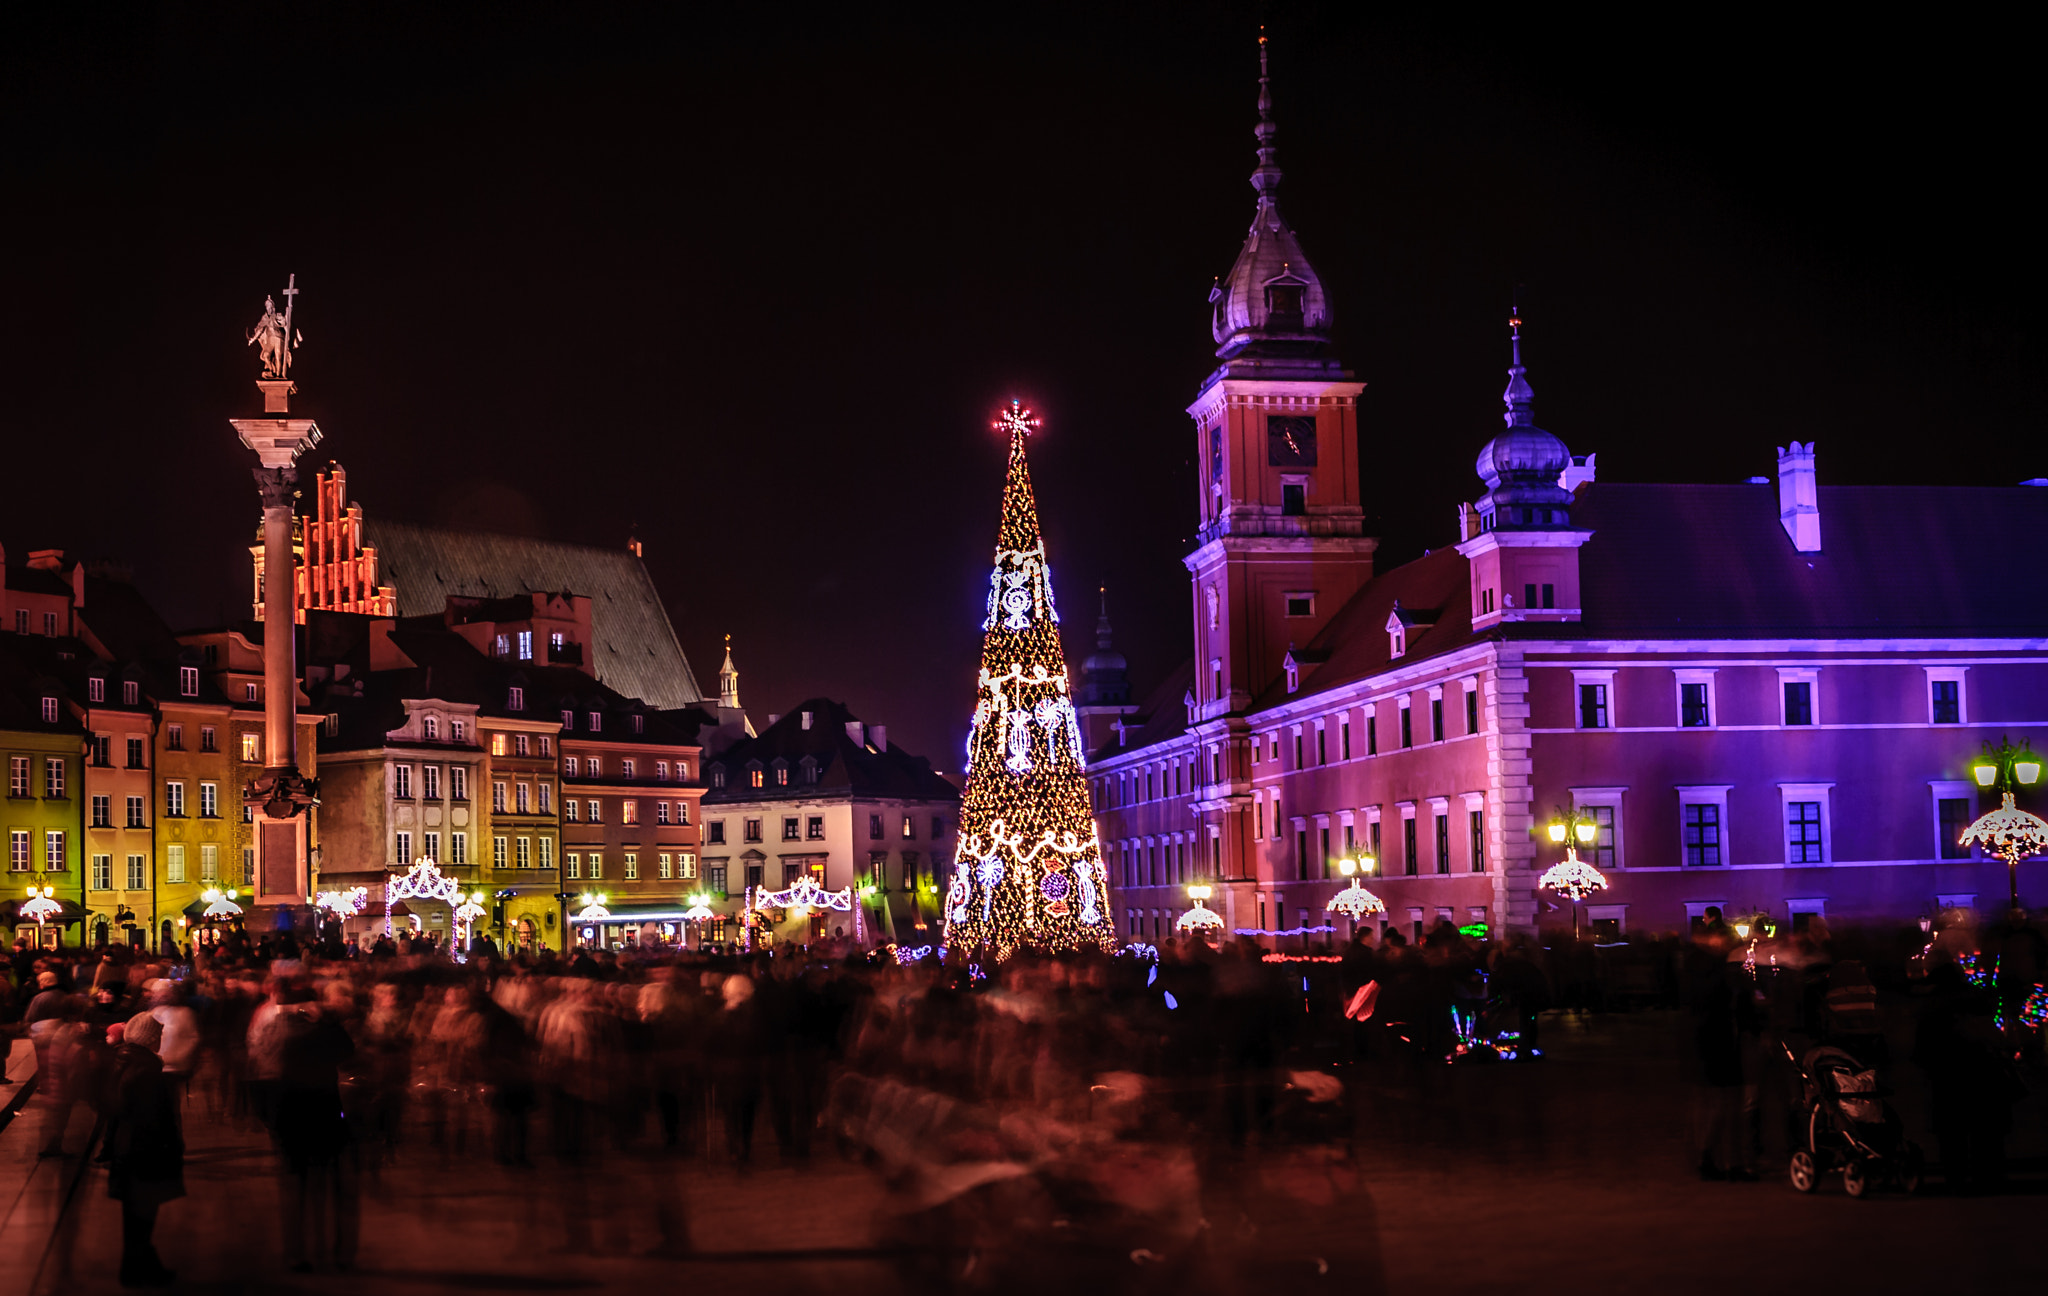 Nikon D80 + Sigma 17-70mm F2.8-4 DC Macro OS HSM | C sample photo. Warsaw by night - old town photography